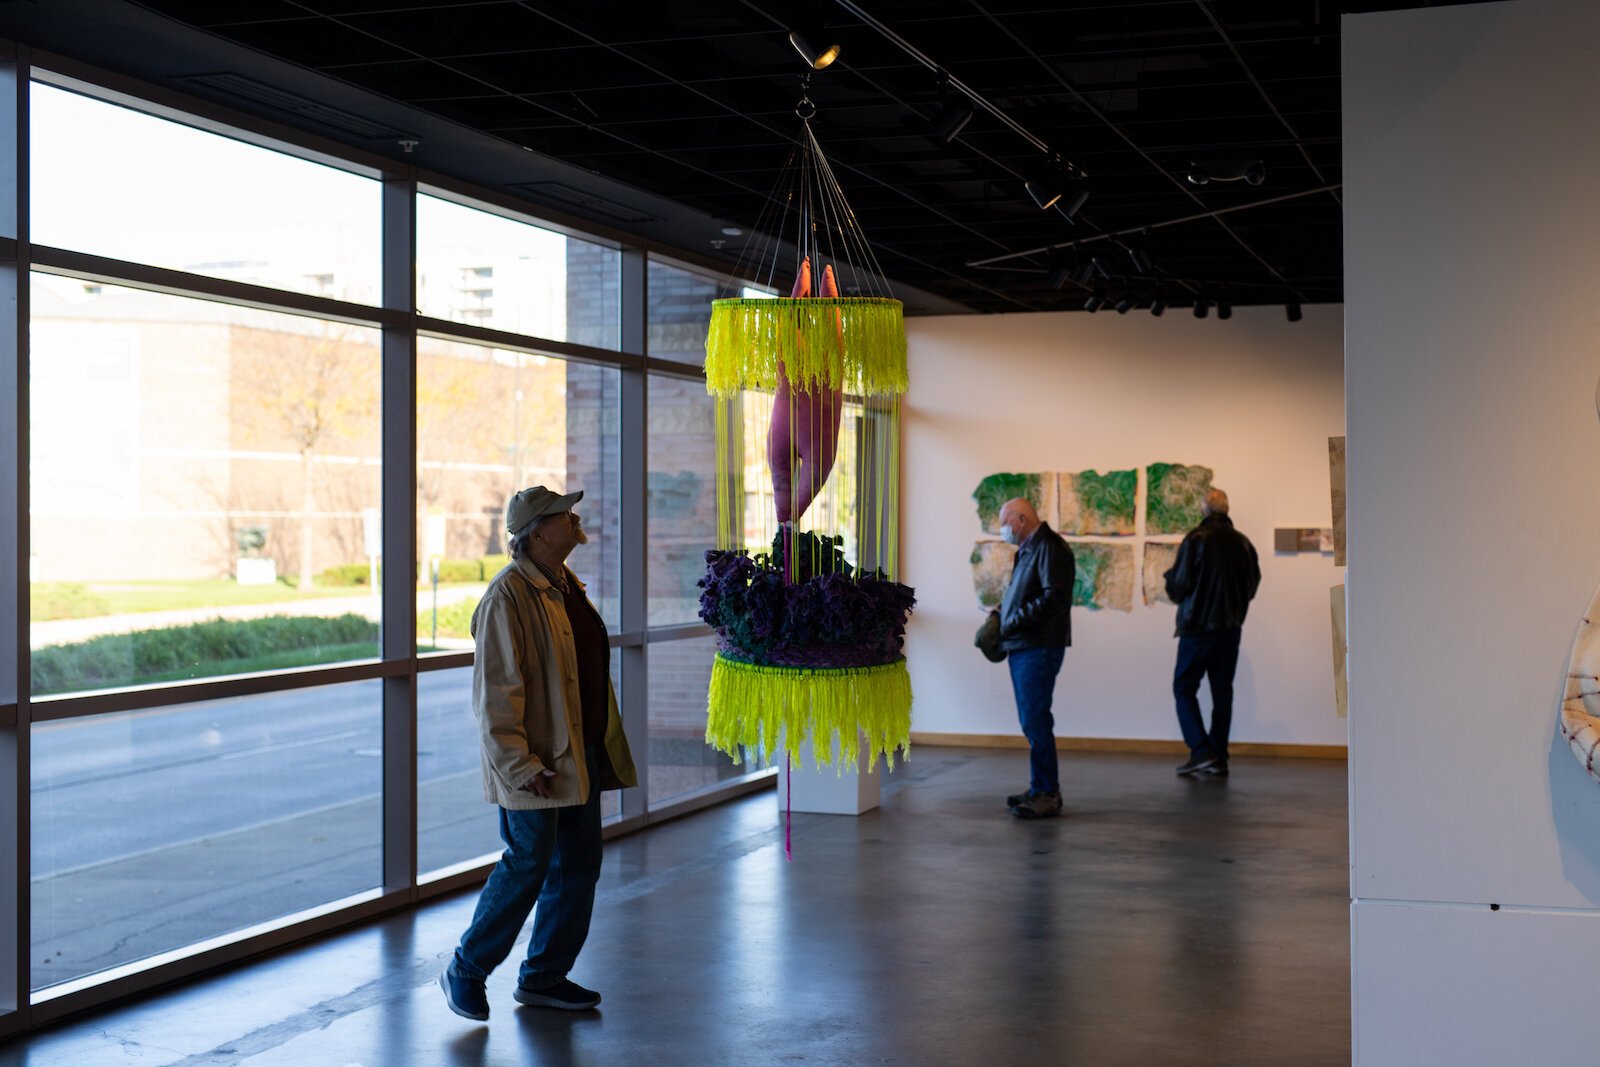 In collaboration with Artist/Mother Podcast, Artlink in Downtown Fort Wayne hosted a group exhibition, Painting at Night, in the winter of 2021, open internationally to artists identifying as mothers or lifelong caregivers.